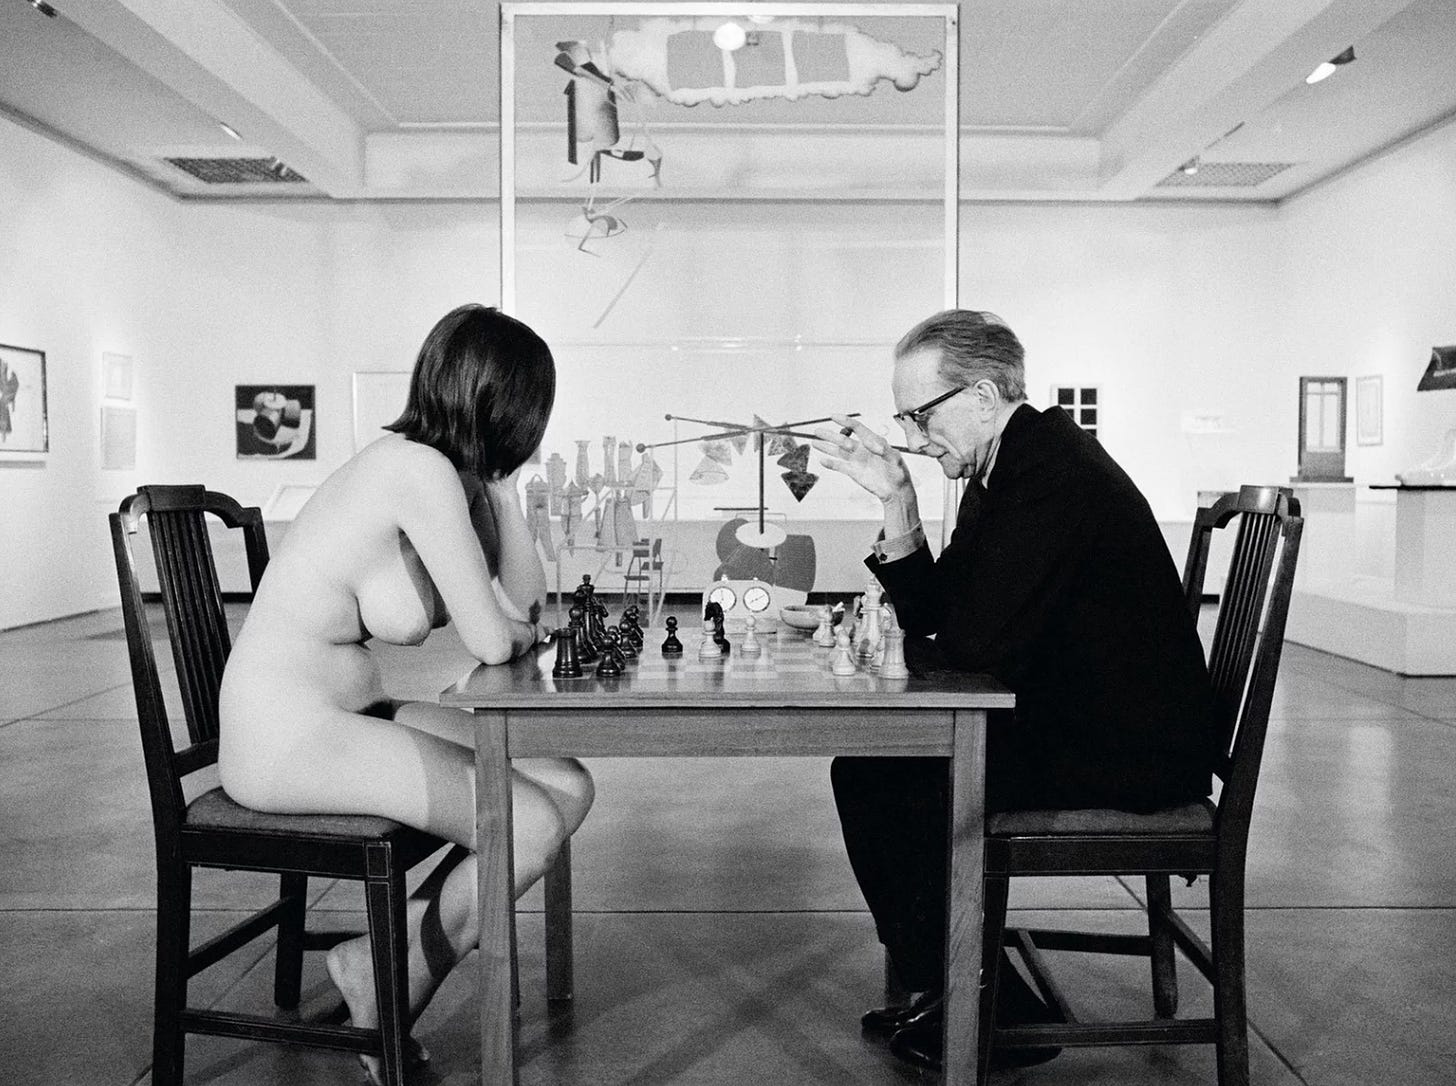 Eve Babtiz and Marcel Duchamp in the famous photograph playing chess